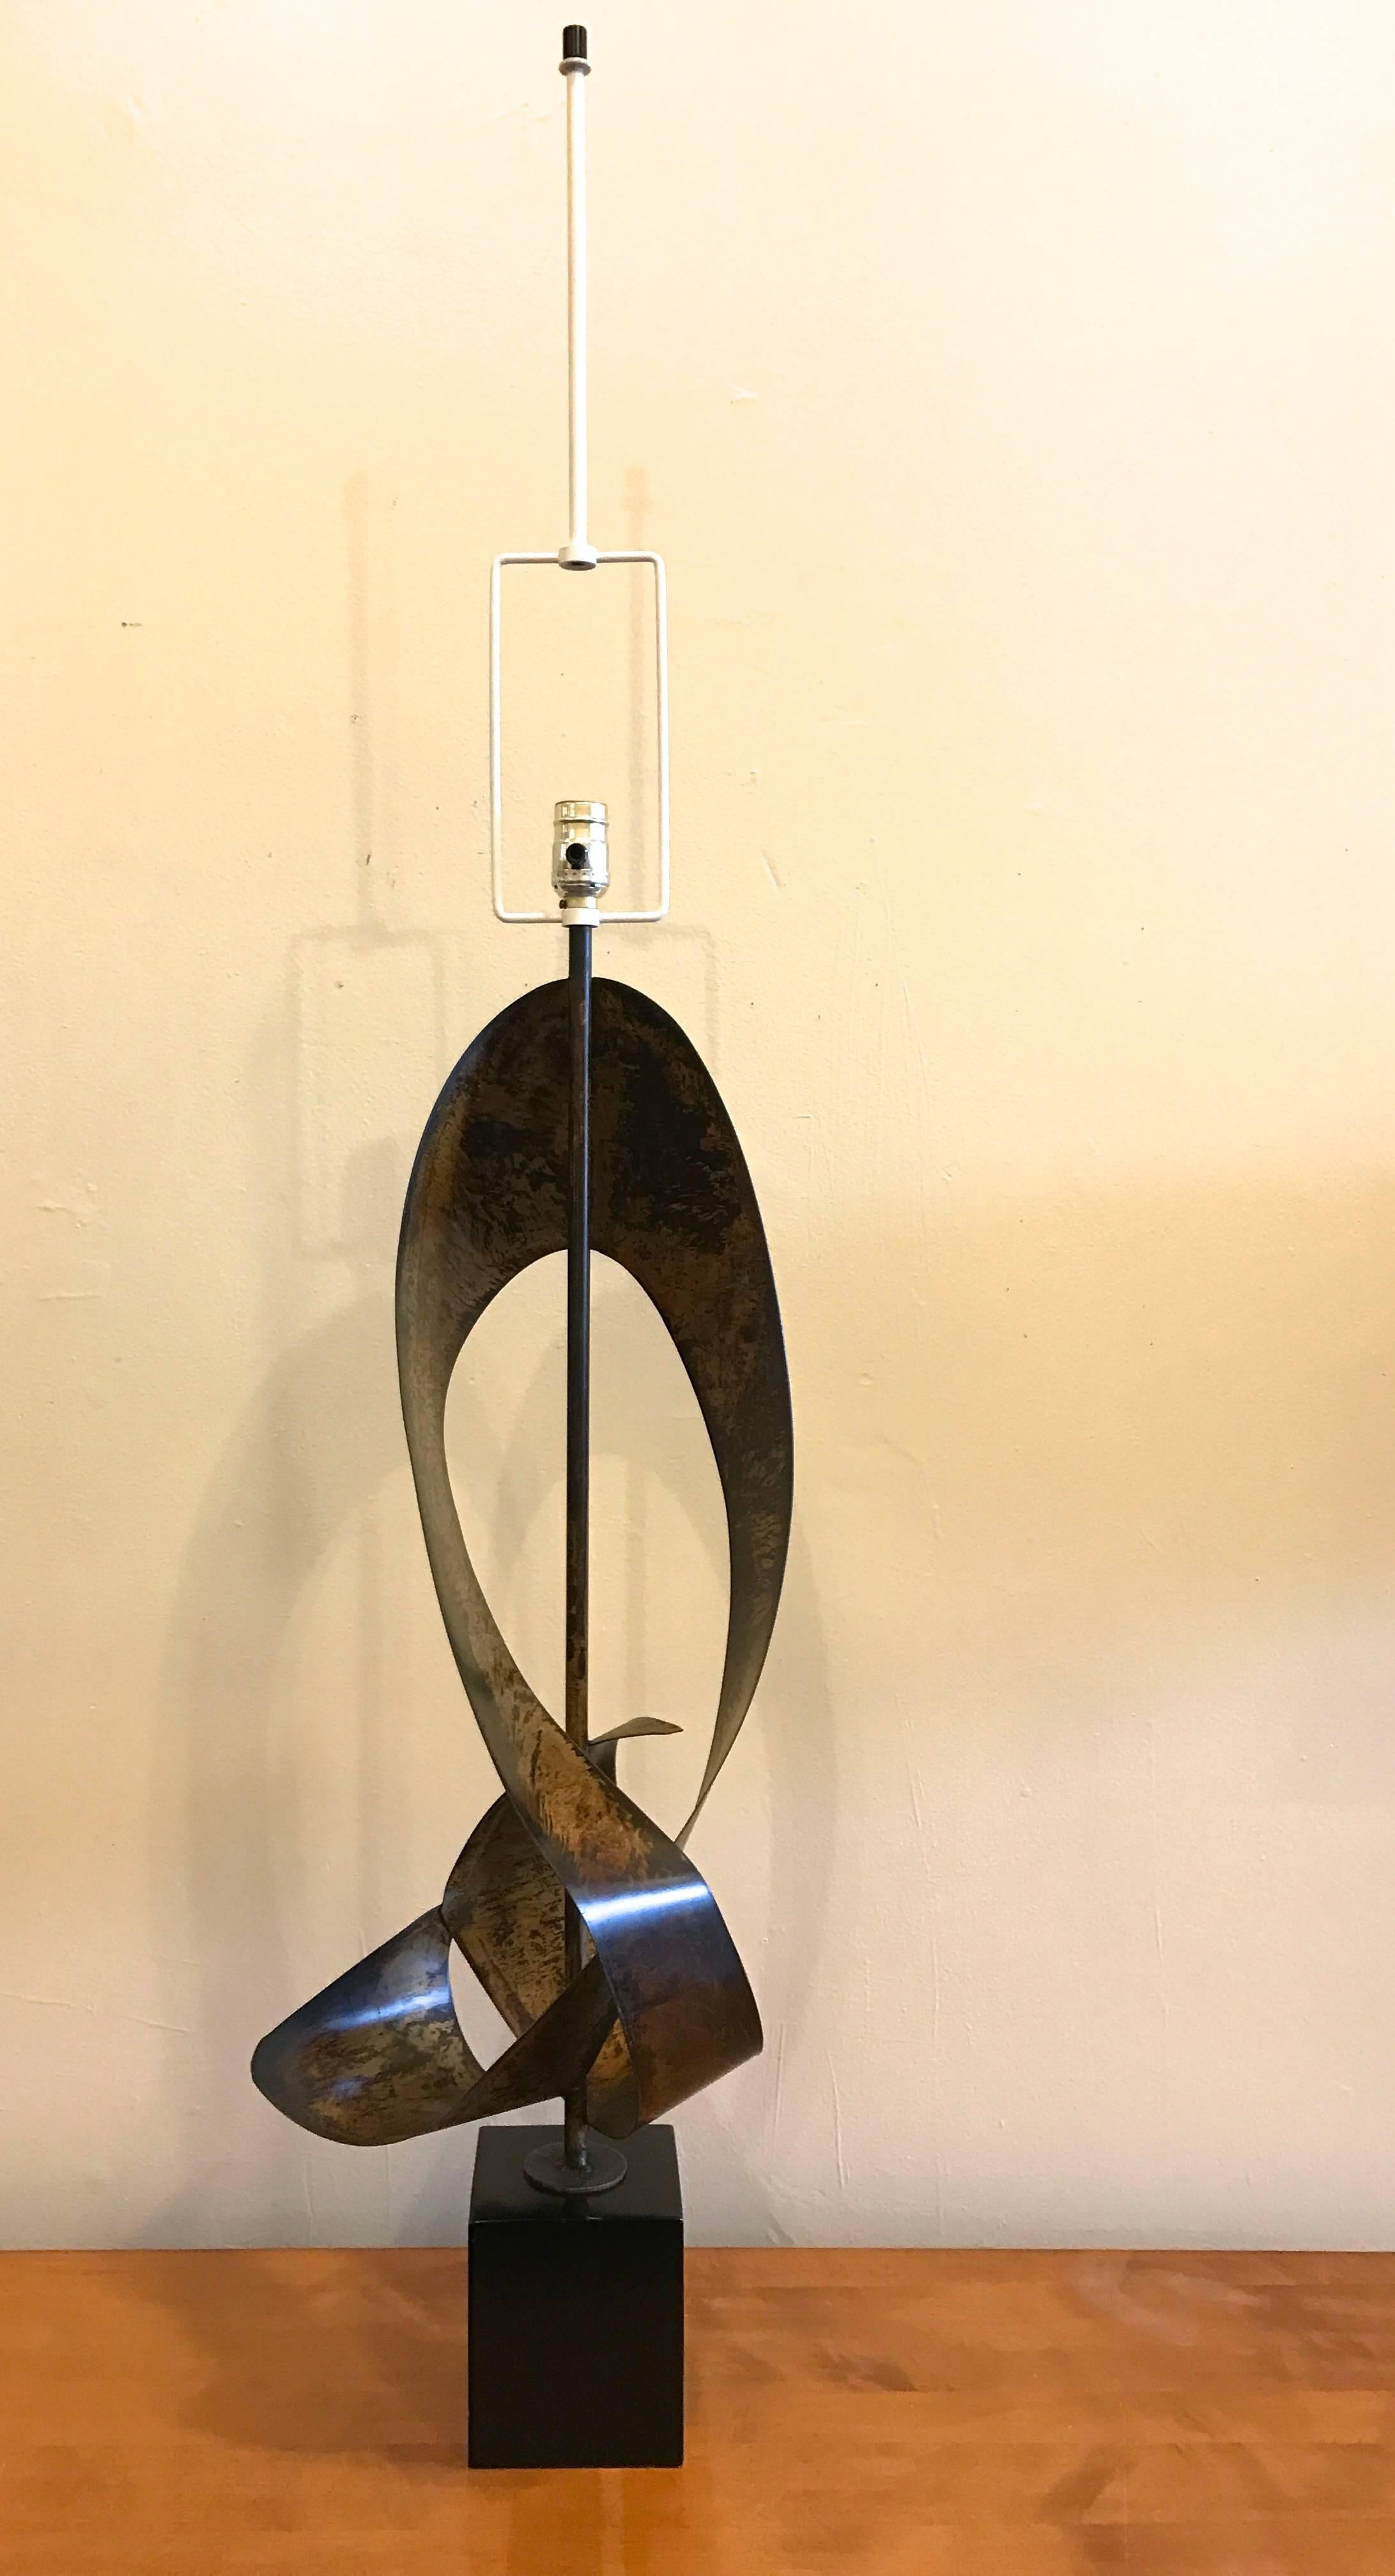 Brutalist metal ribbon sculpture lamp by Harry Balmer for the Laurel Lighting Company, circa 1960s. These lamps were created with an applied patina finish to give it a weathered appearance and the base was lacquered a satin black. The height of the